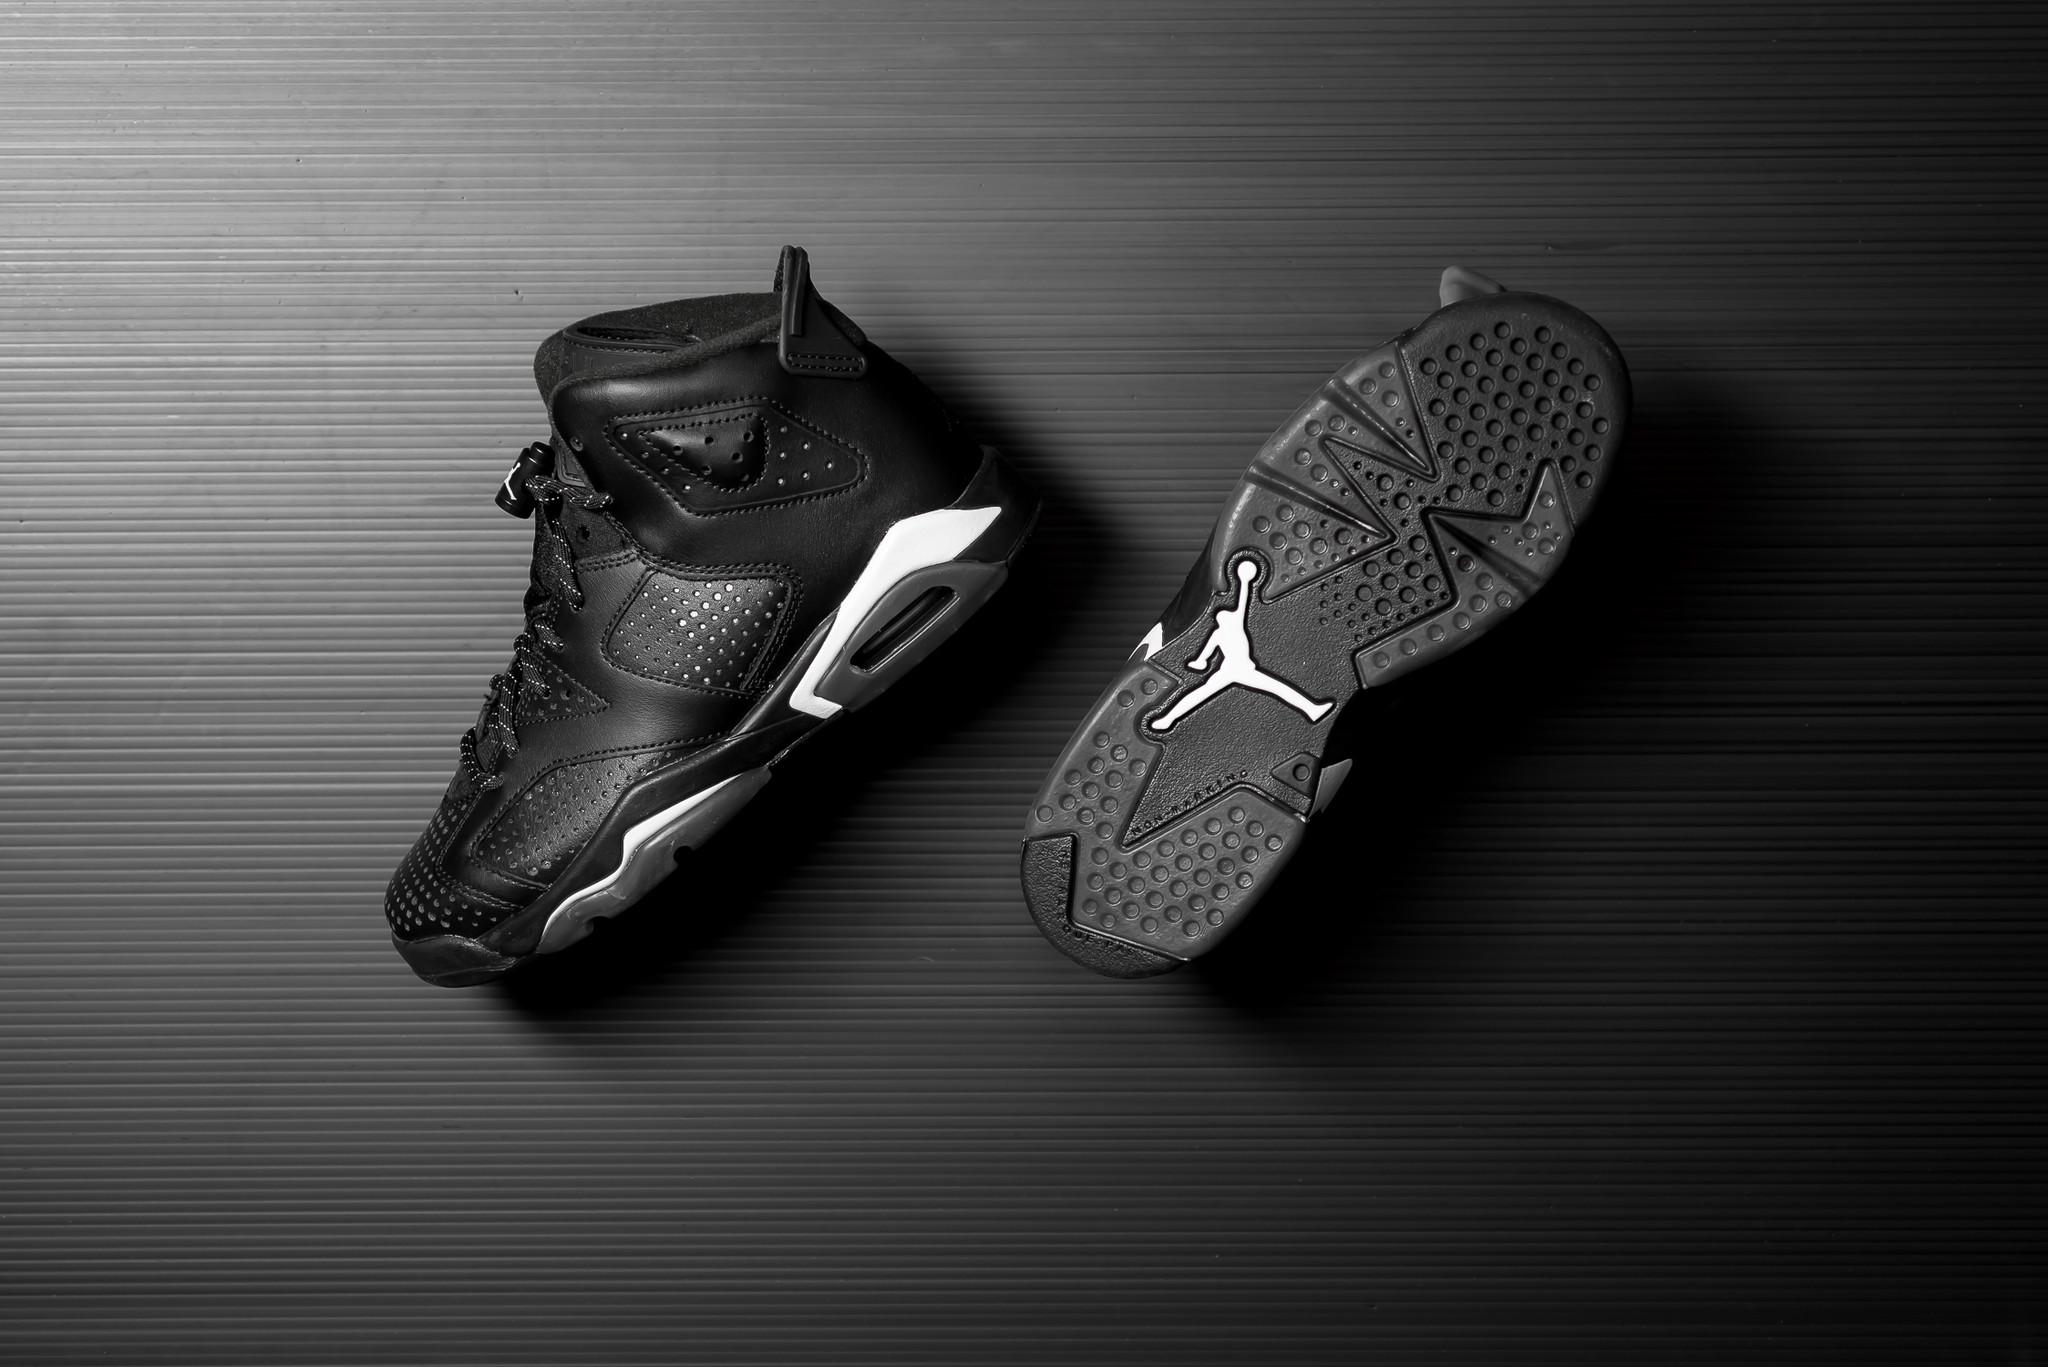 The Air Jordan 6 Black Cat Will Be Available In GS Sizes Too